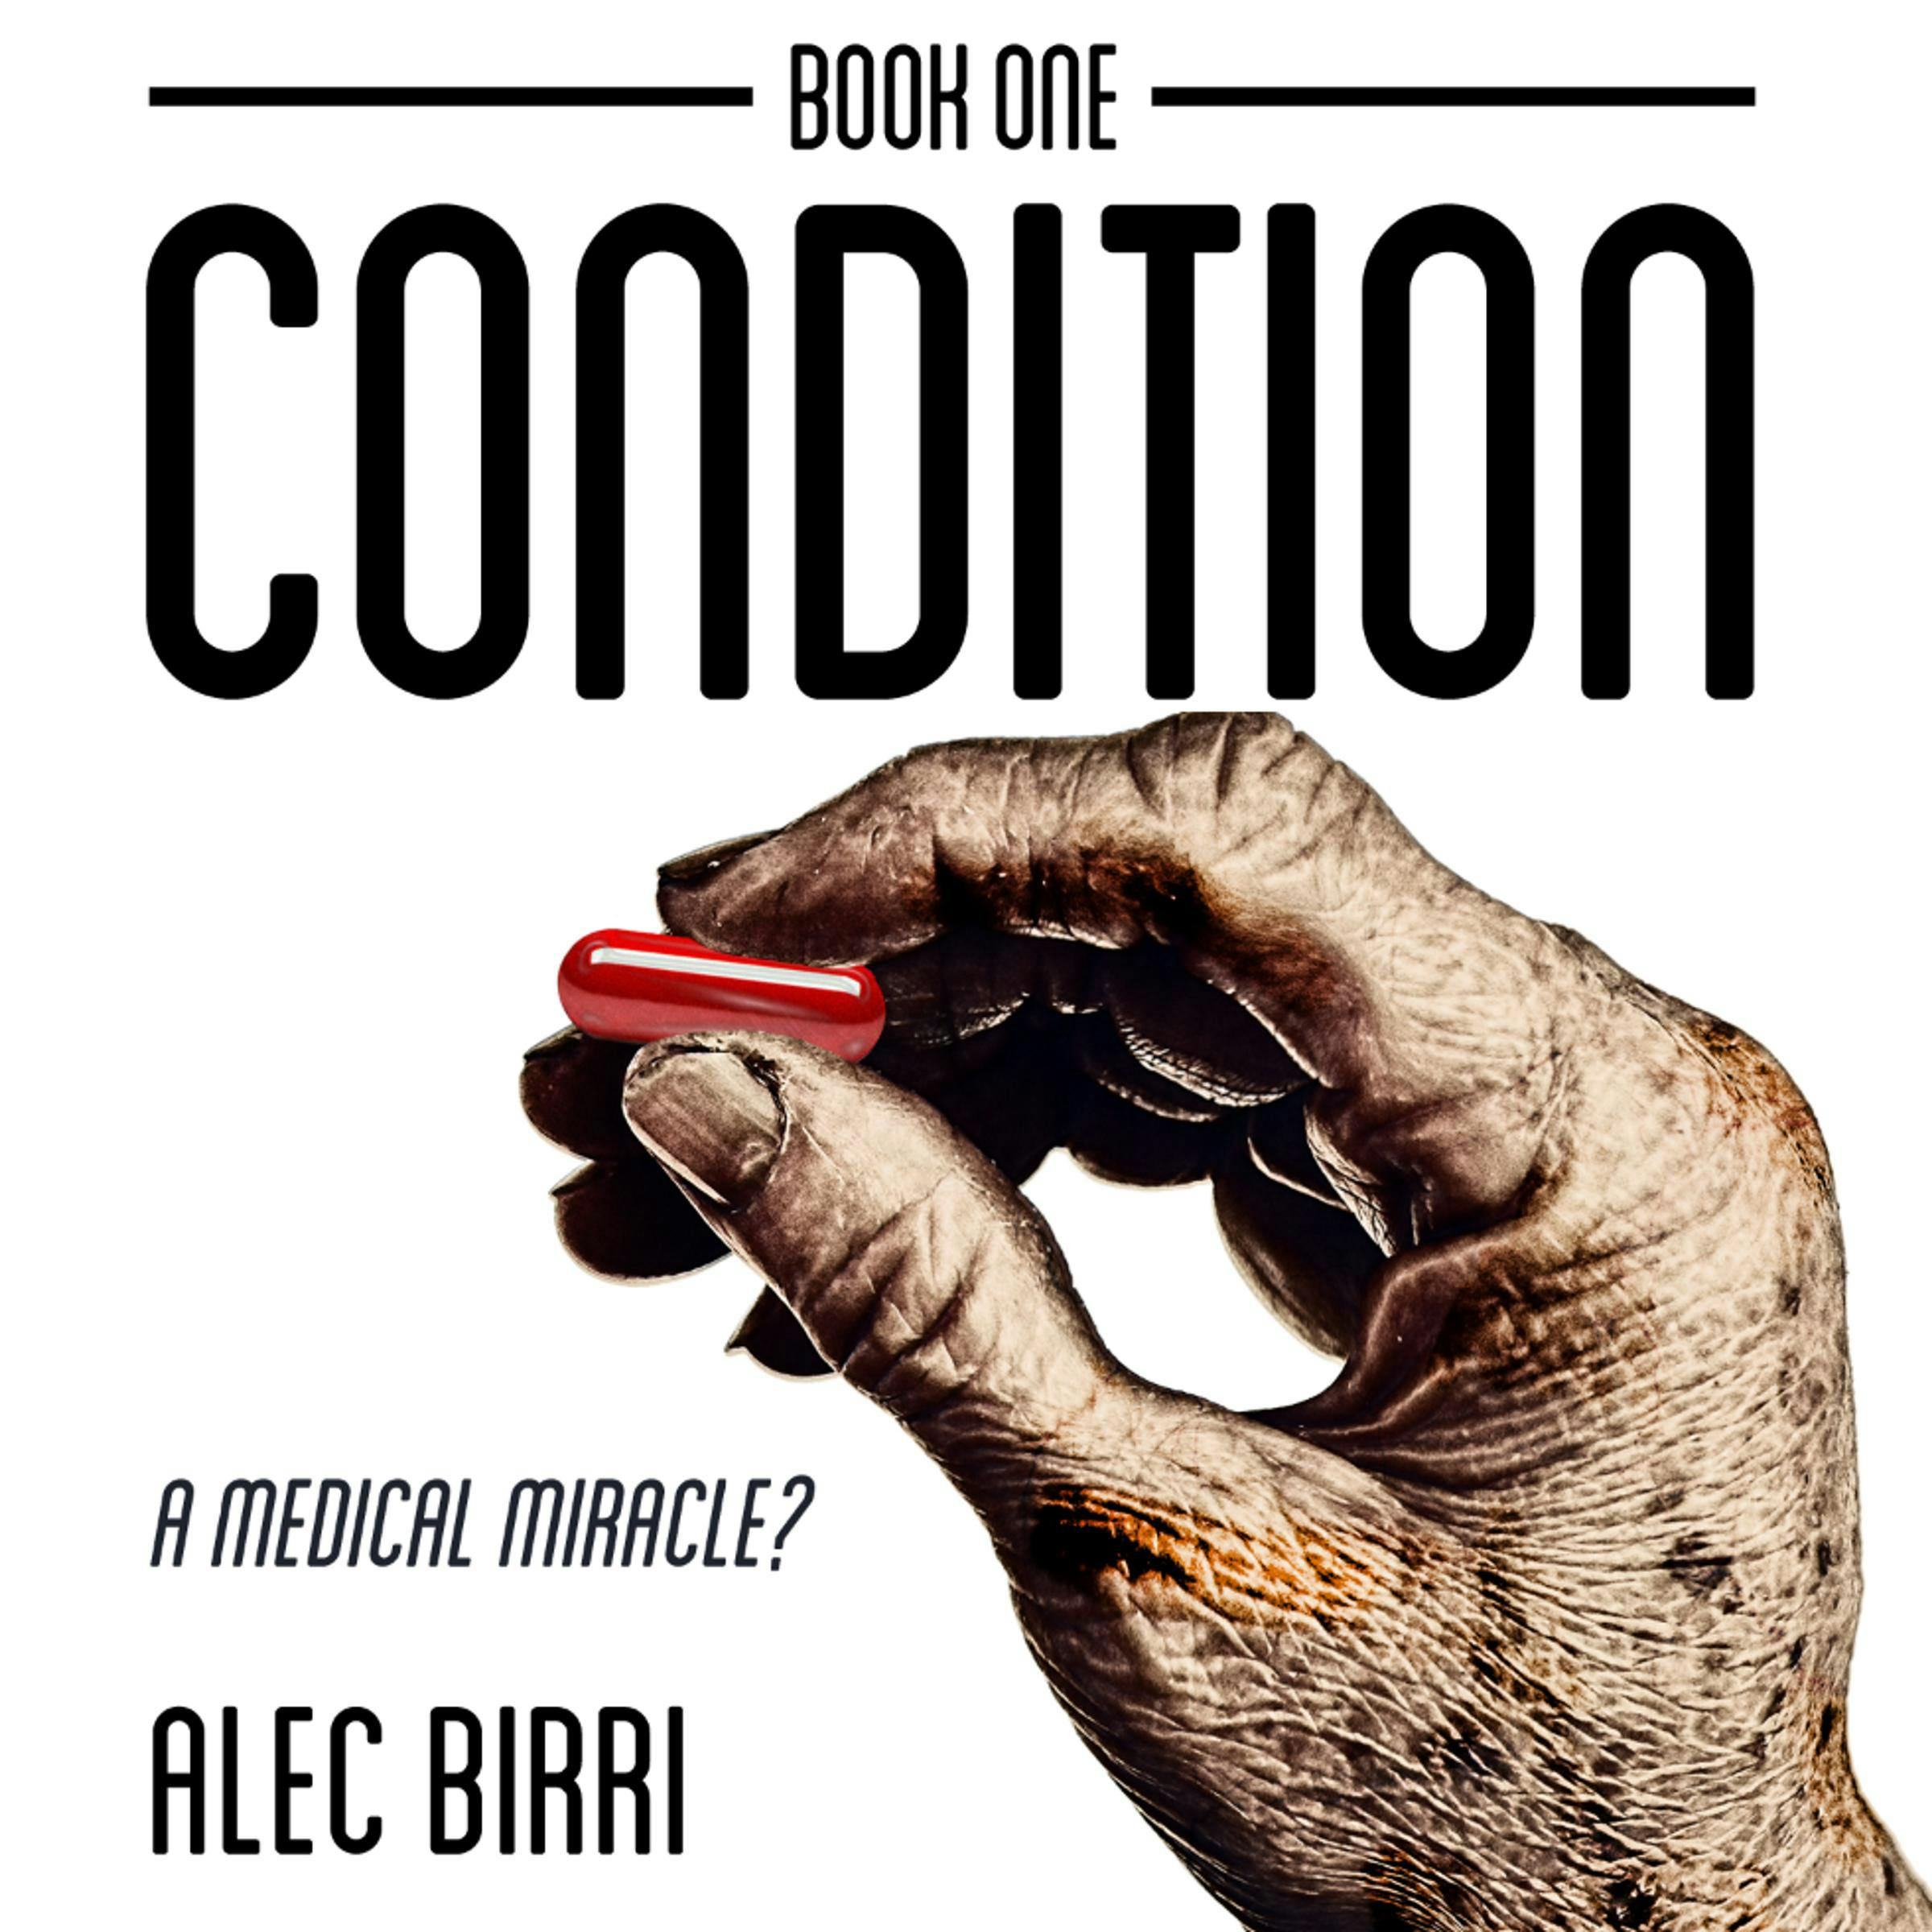 Condition Book One: A Medical Miracle? - Alec Birri